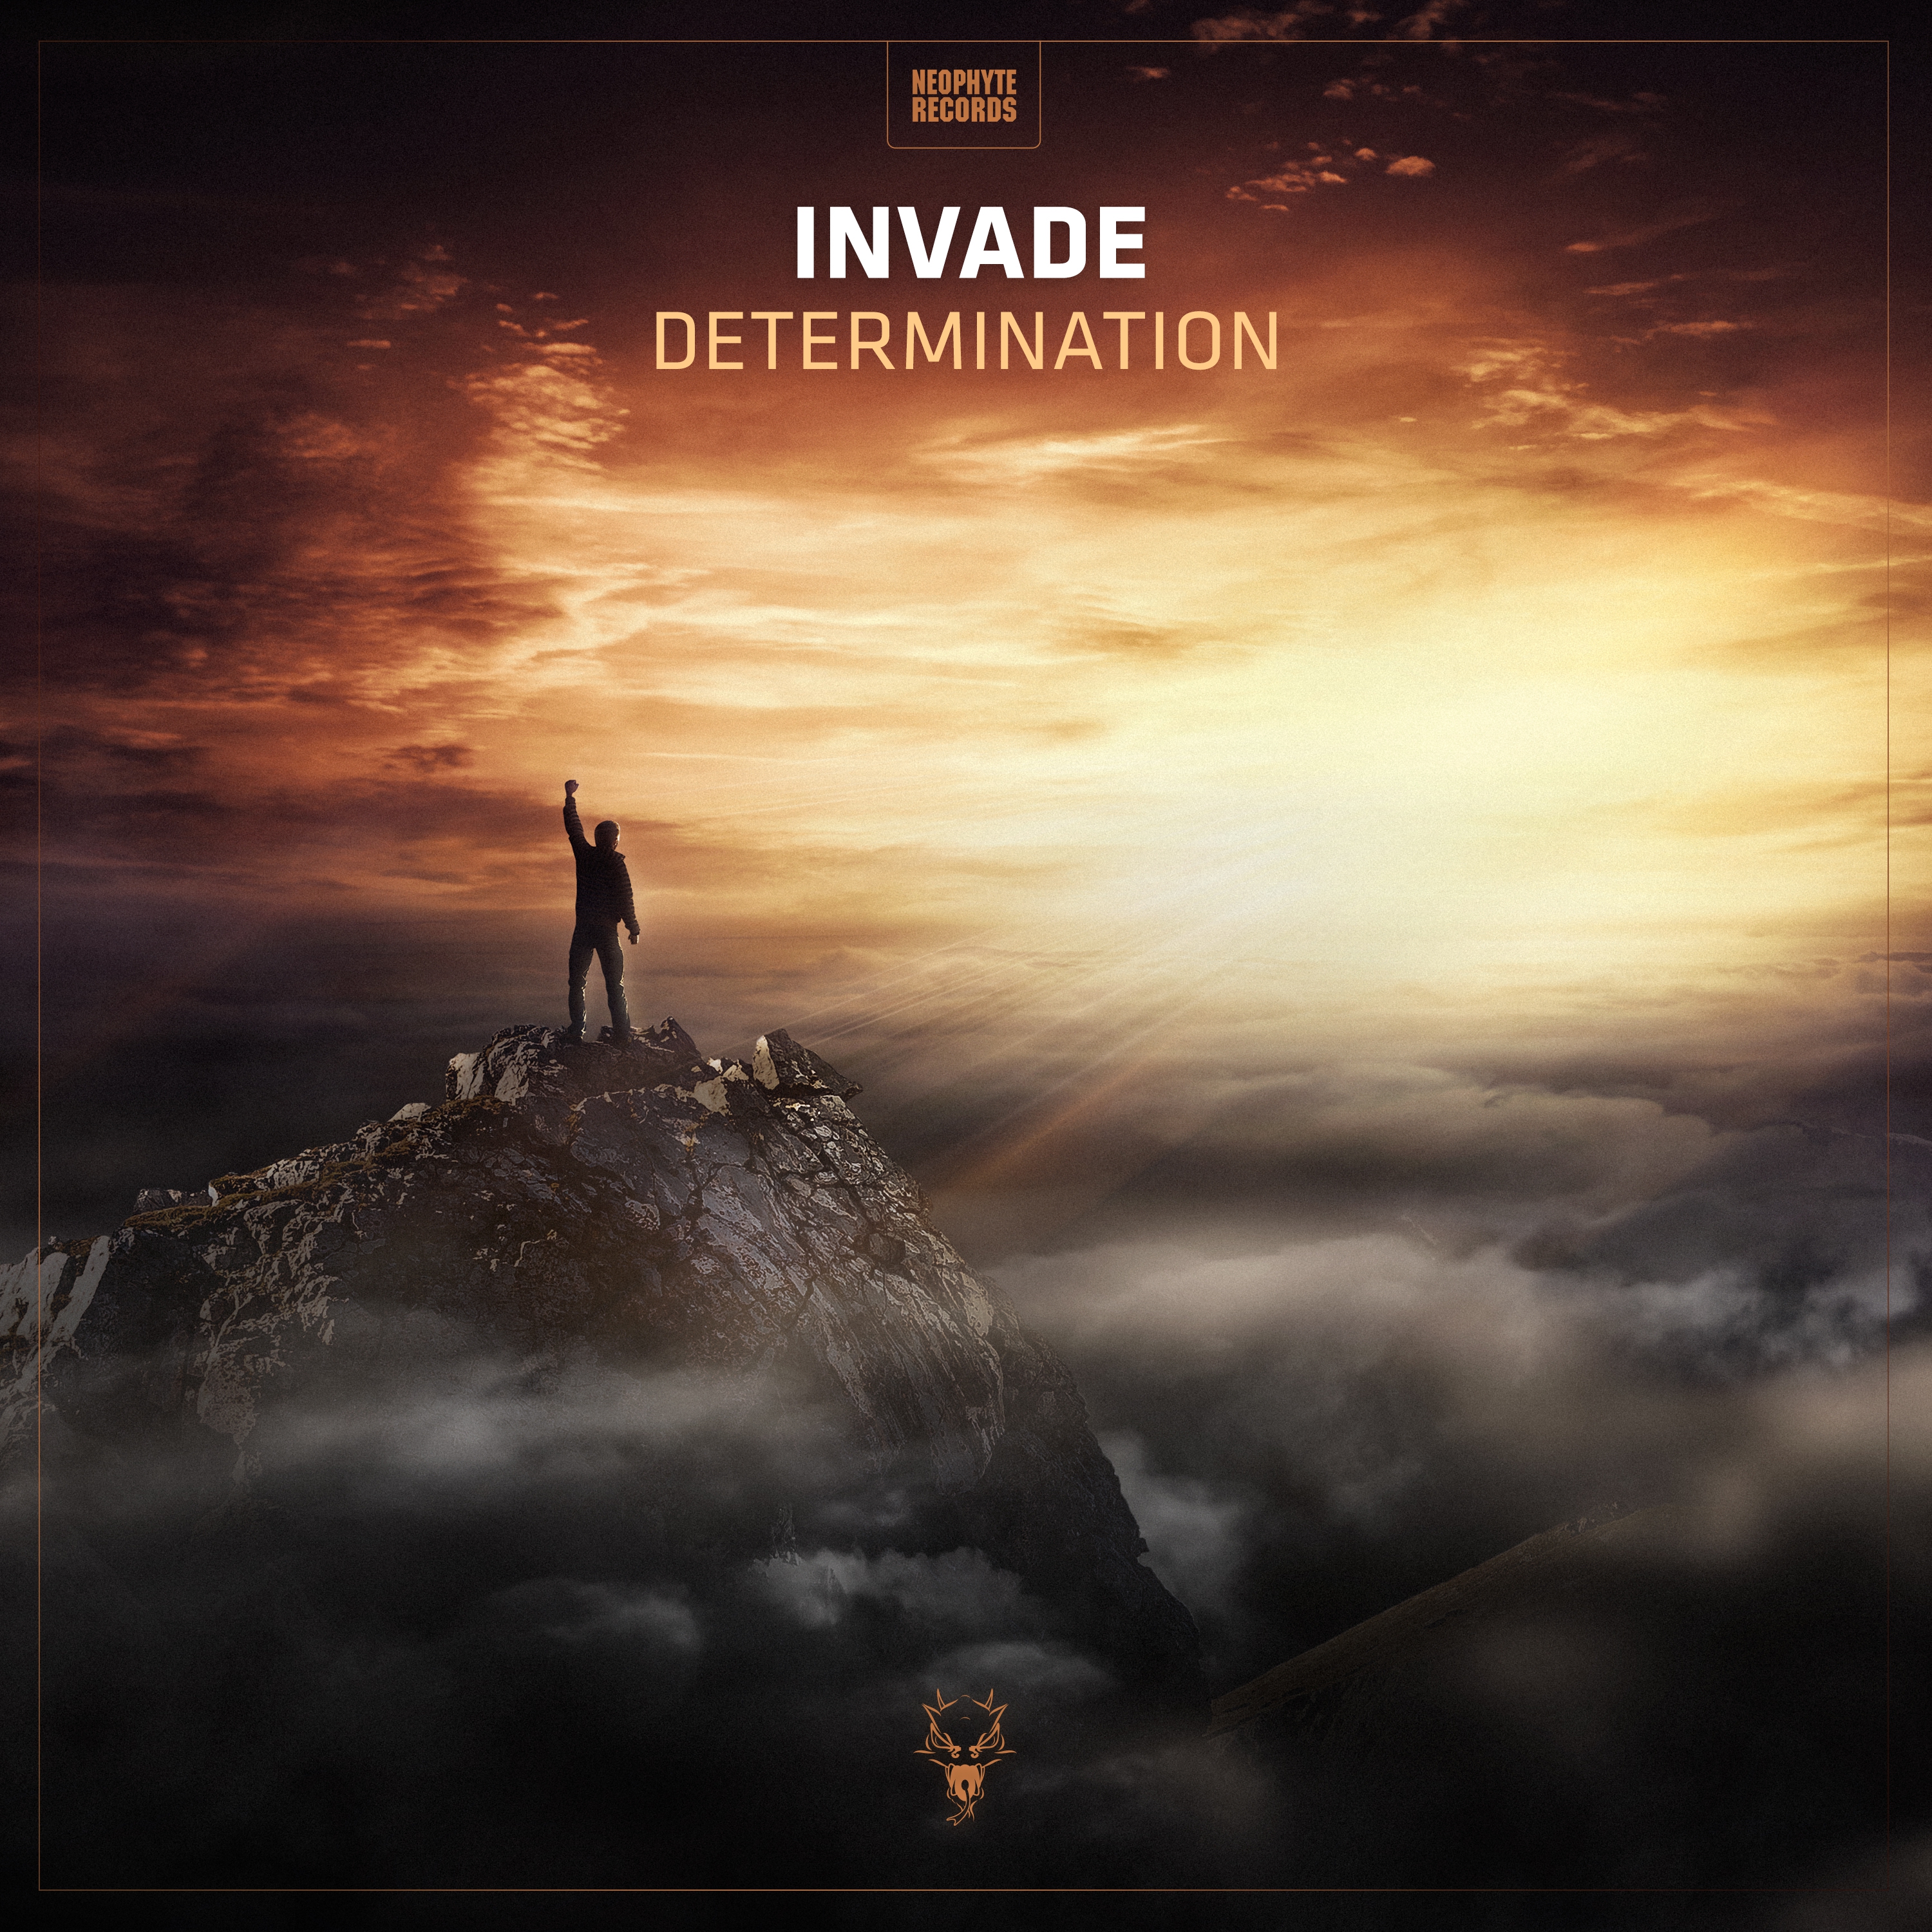 INVADE - Determination (Edit) - MP3 and WAV downloads at Hardtunes